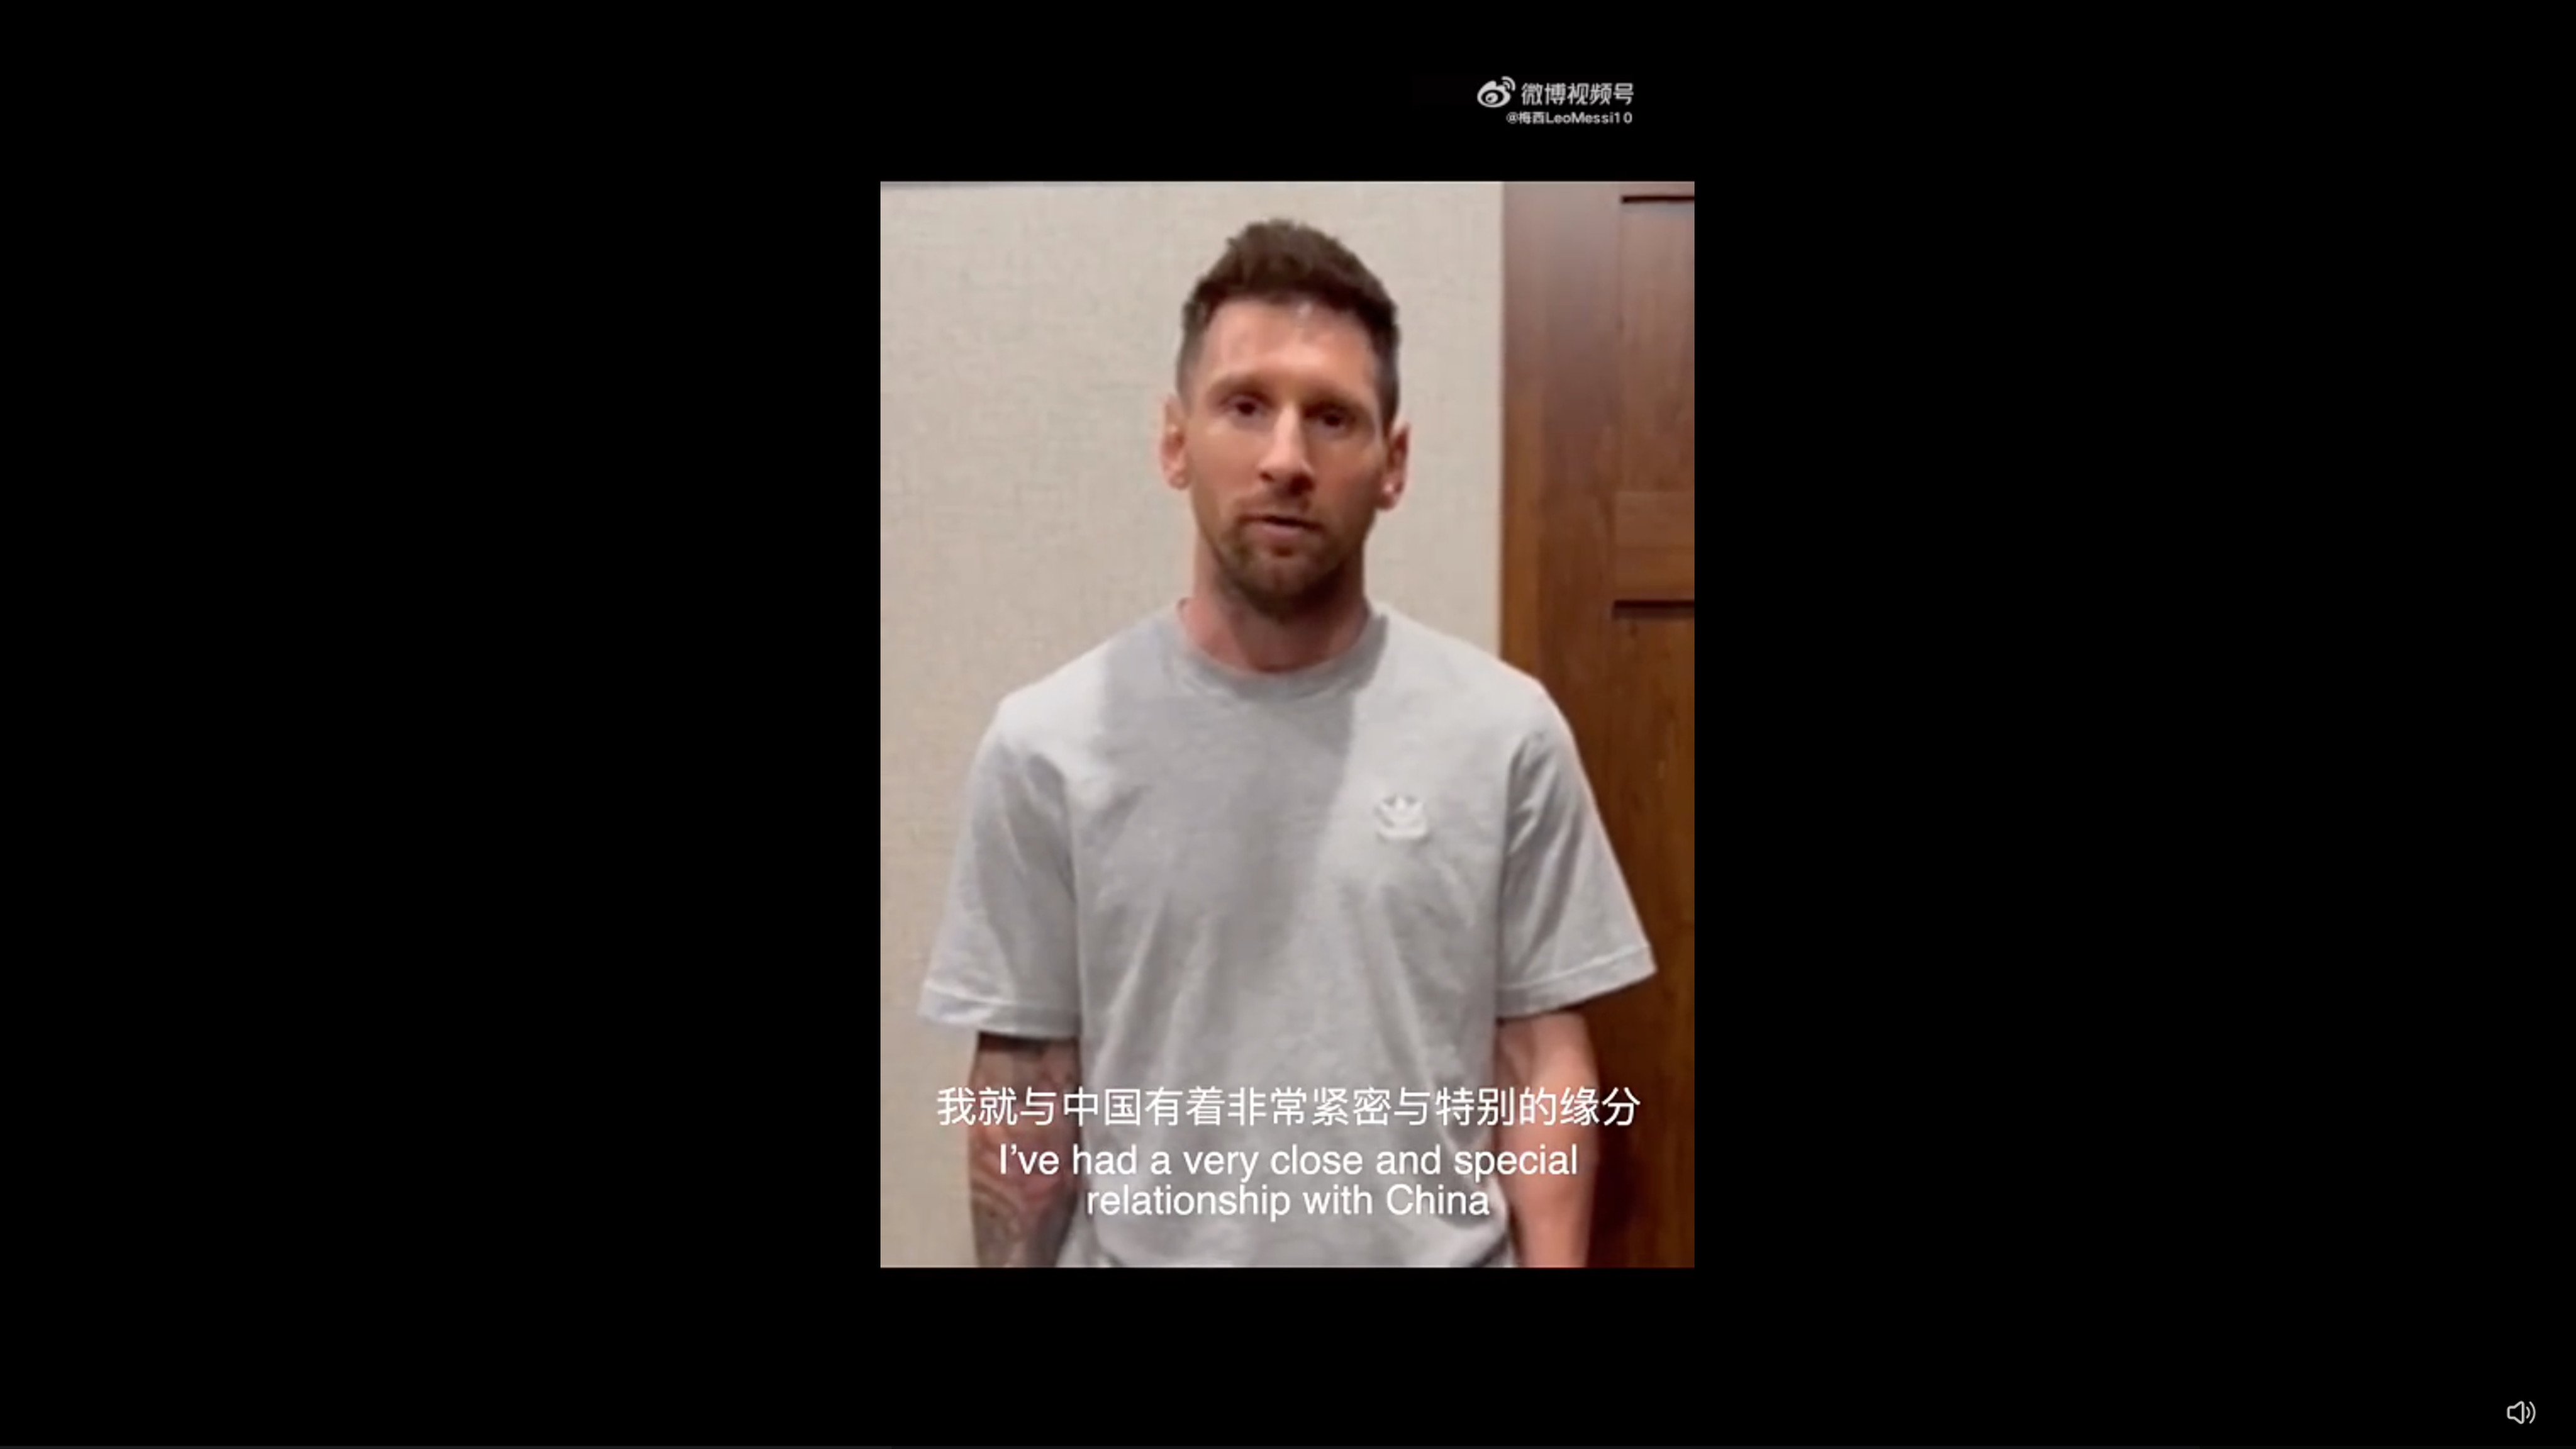 Lionel Messi appears in a social media post on Weibo. Messi spoke about his personal fondness for China and expressed hopes of seeing his fans there again. Photo: Weibo